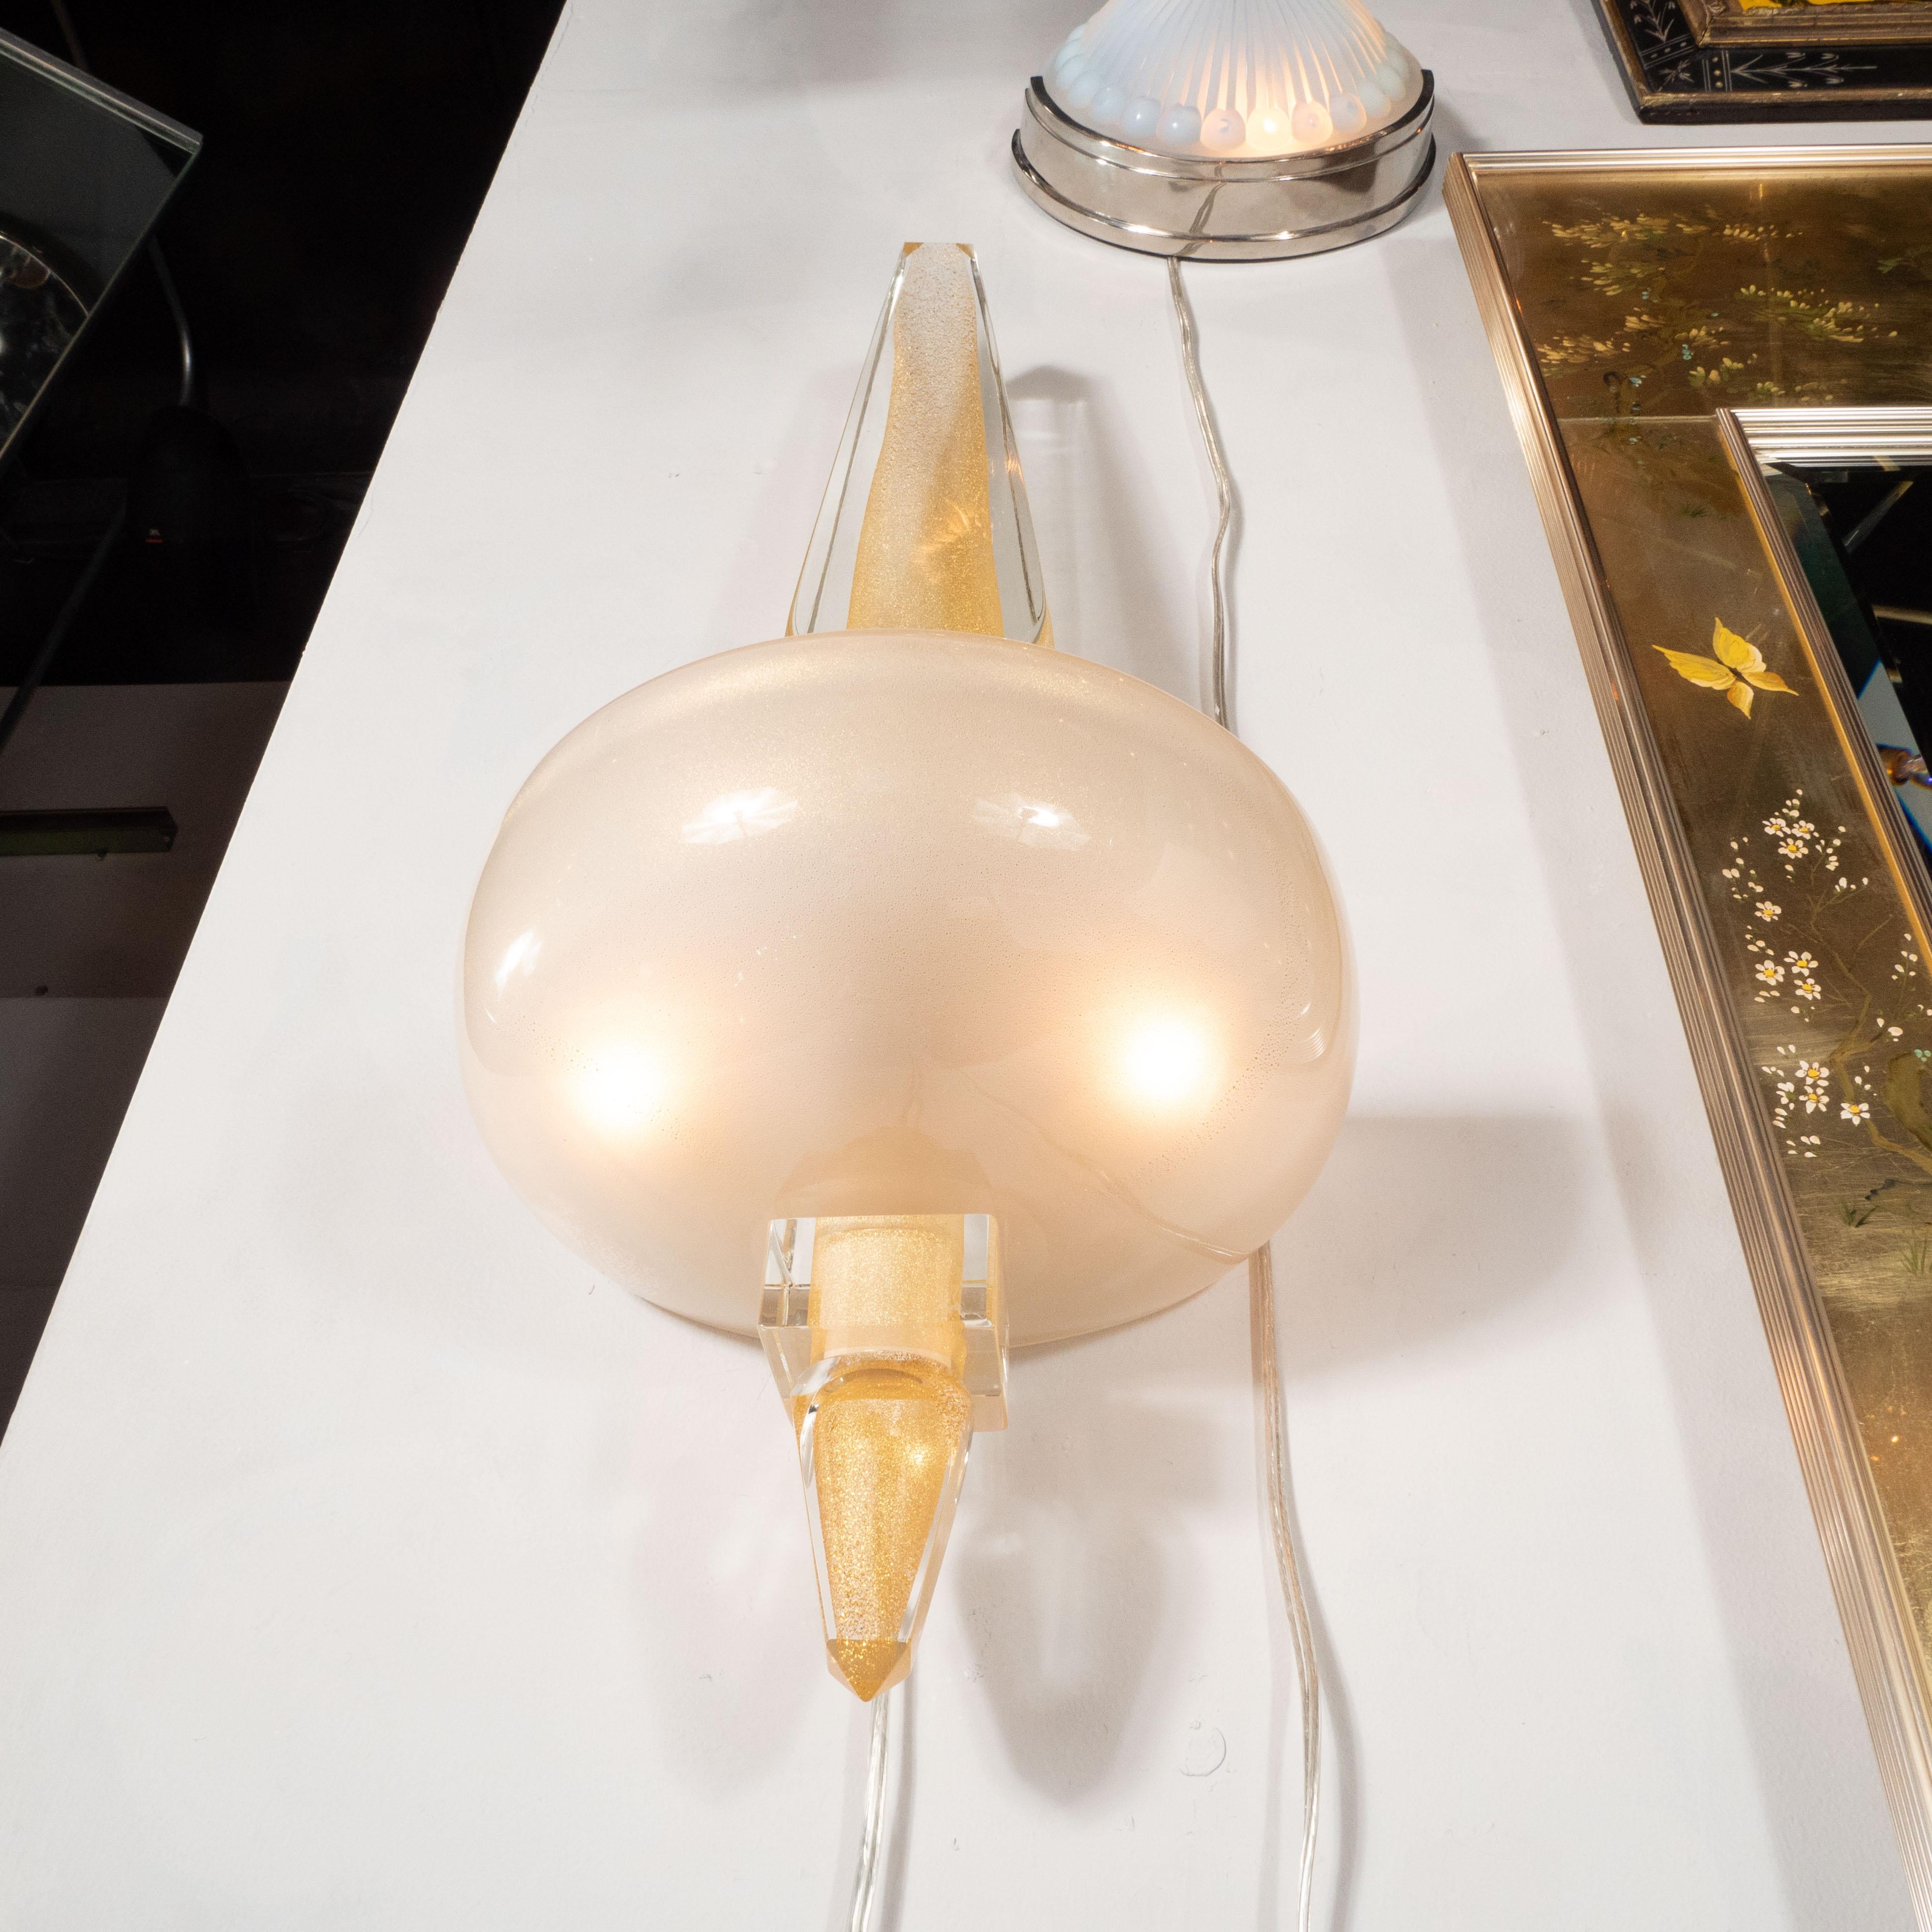 Pair of Modernist Murano Obelisk Sconces in Pearlescent Glass with 24-Karat Gold 2